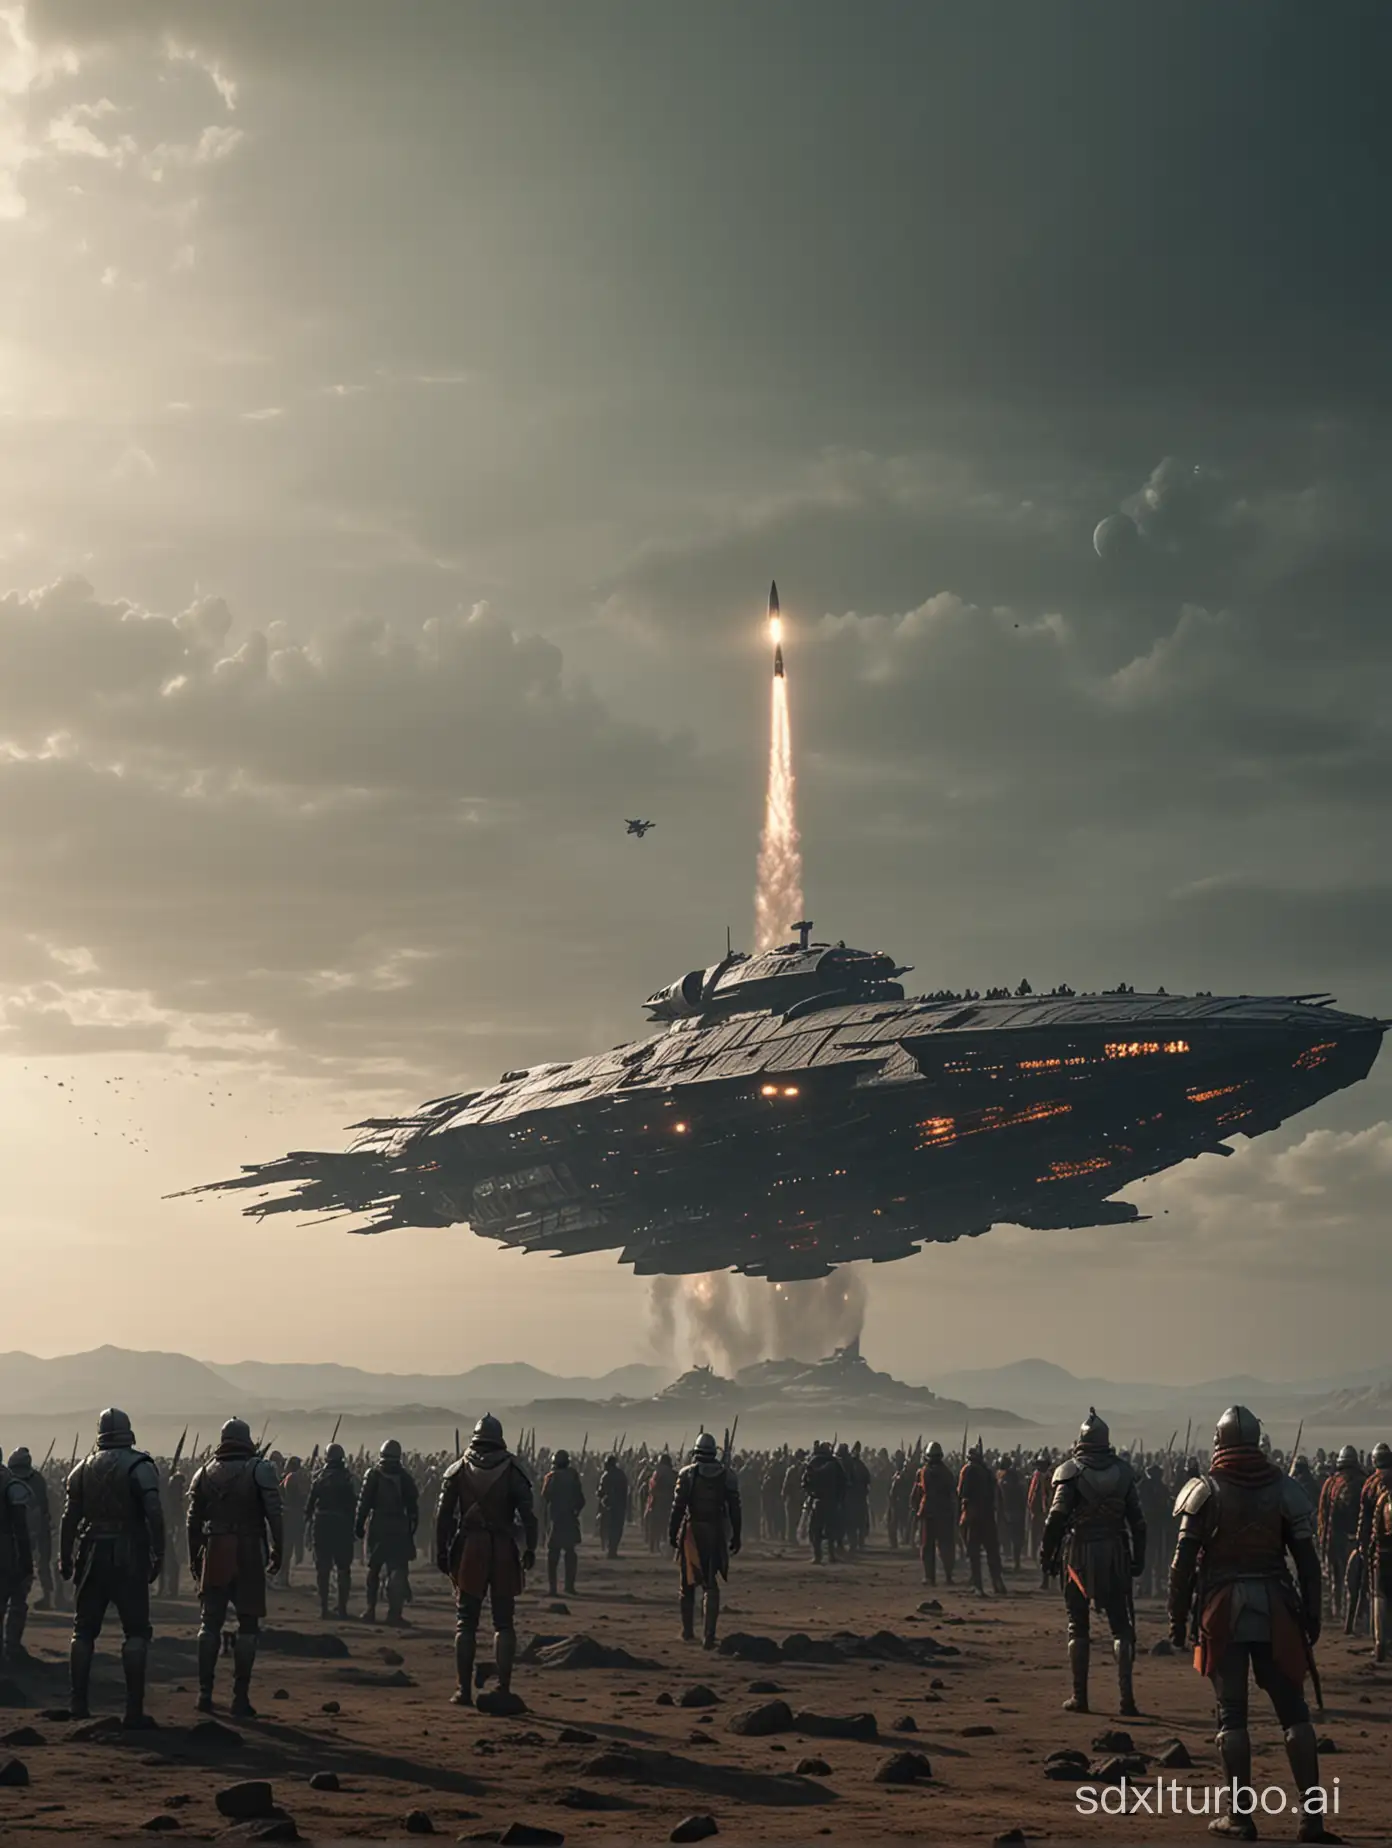 Wide shot of a medieval Indian battlefield, Maratha and Mughal soldiers facing each other, a huge spaceship that seems to be a blend of Indian culture and futuristic sci-fi vehicle approaches downwards from the sky above, cinematic, 4K, dark grungy, Directed by Zack Snyder, shot on Arri Alexa.